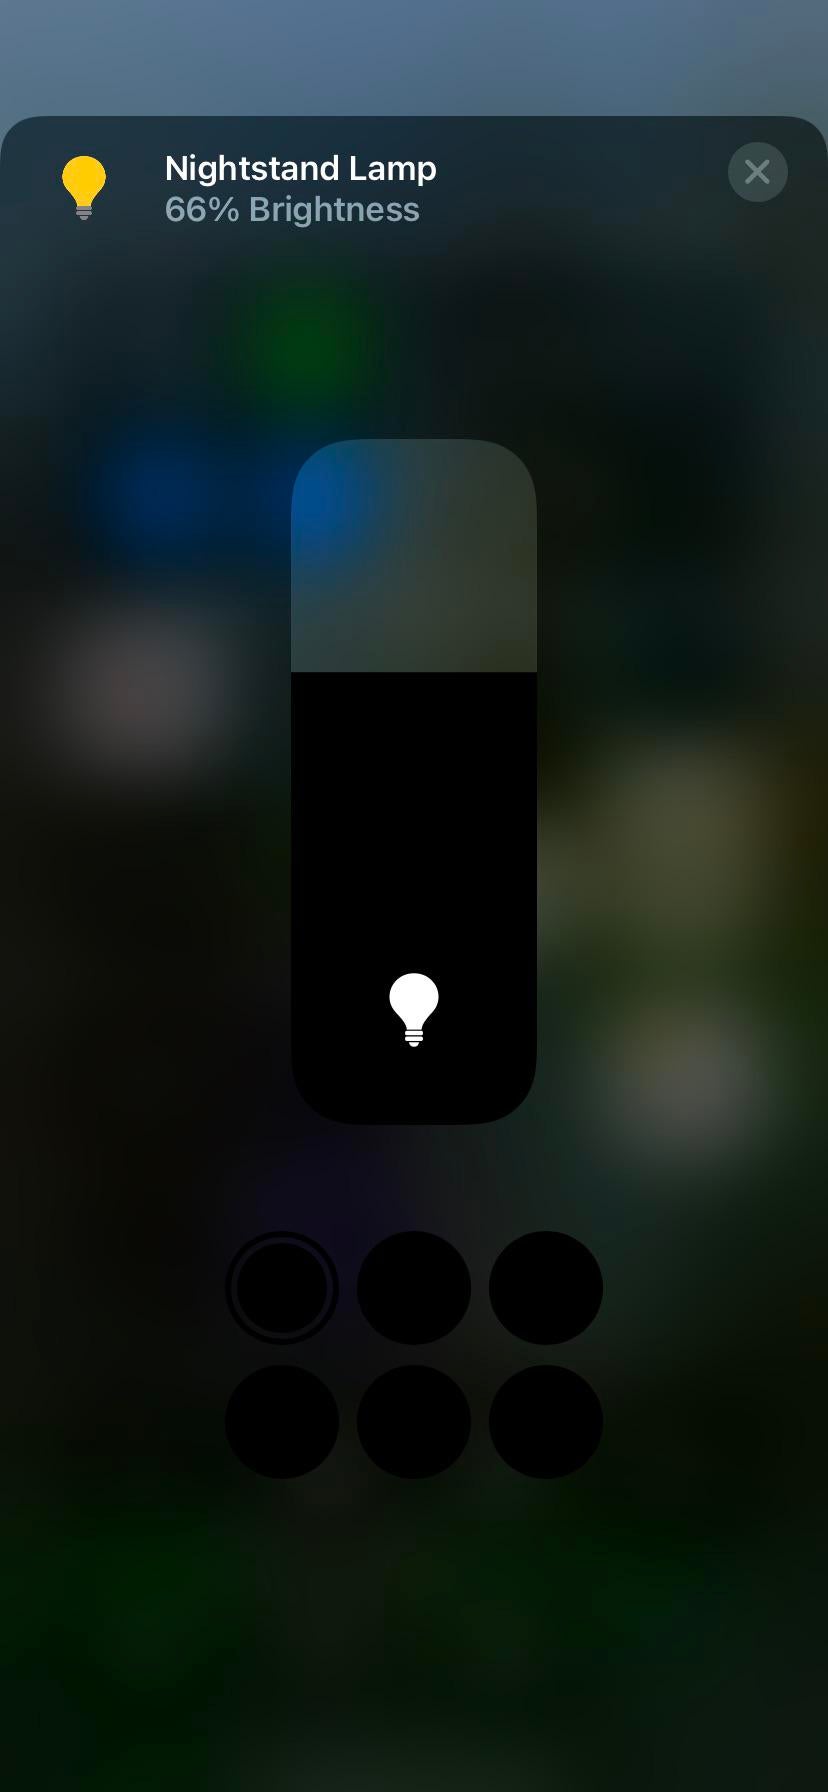 The Philips Hue light options are black